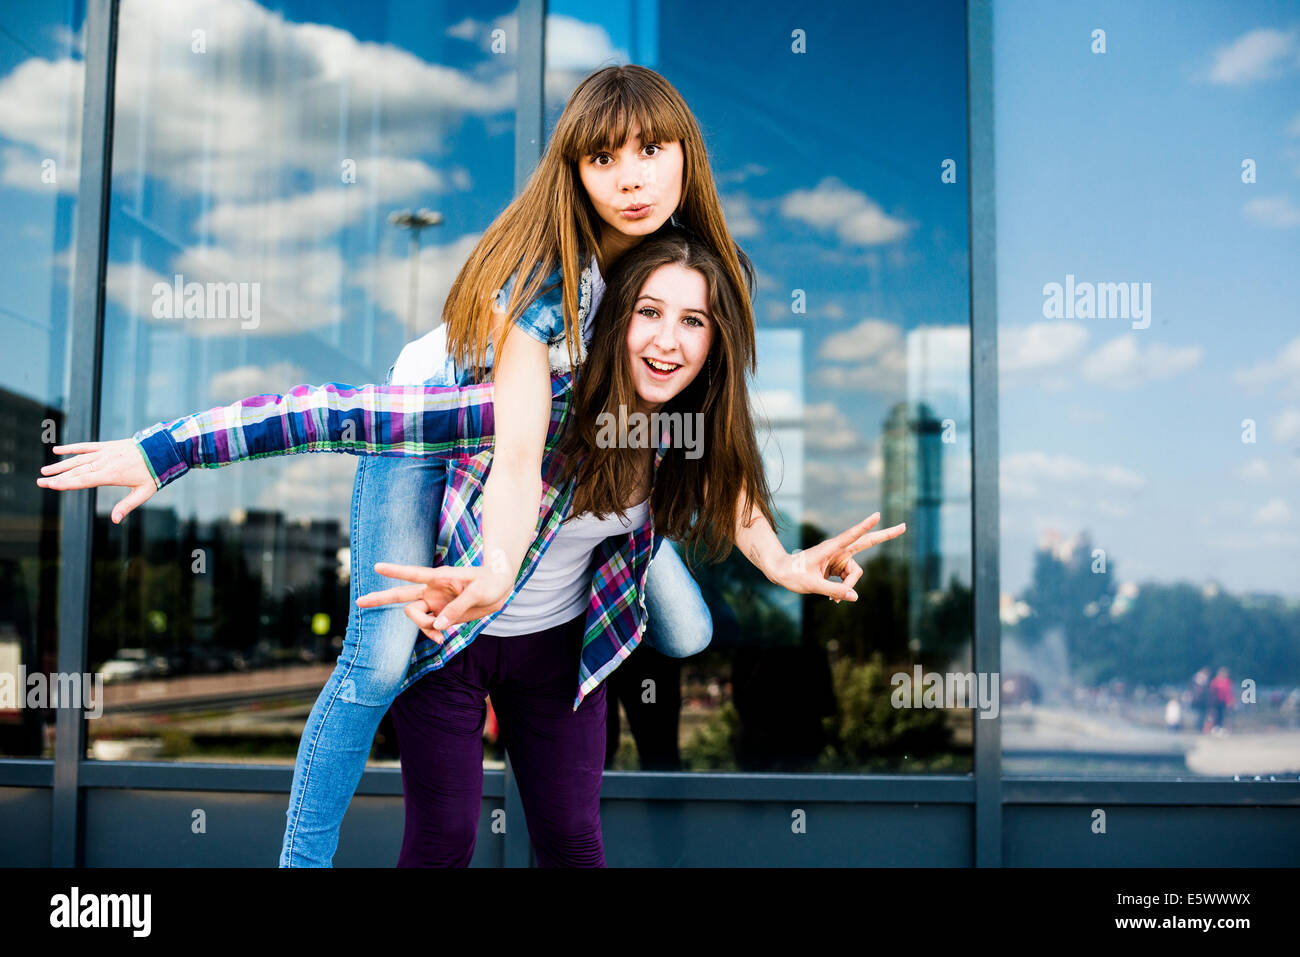 Two young women piggybacking and making peace signs Stock Photo